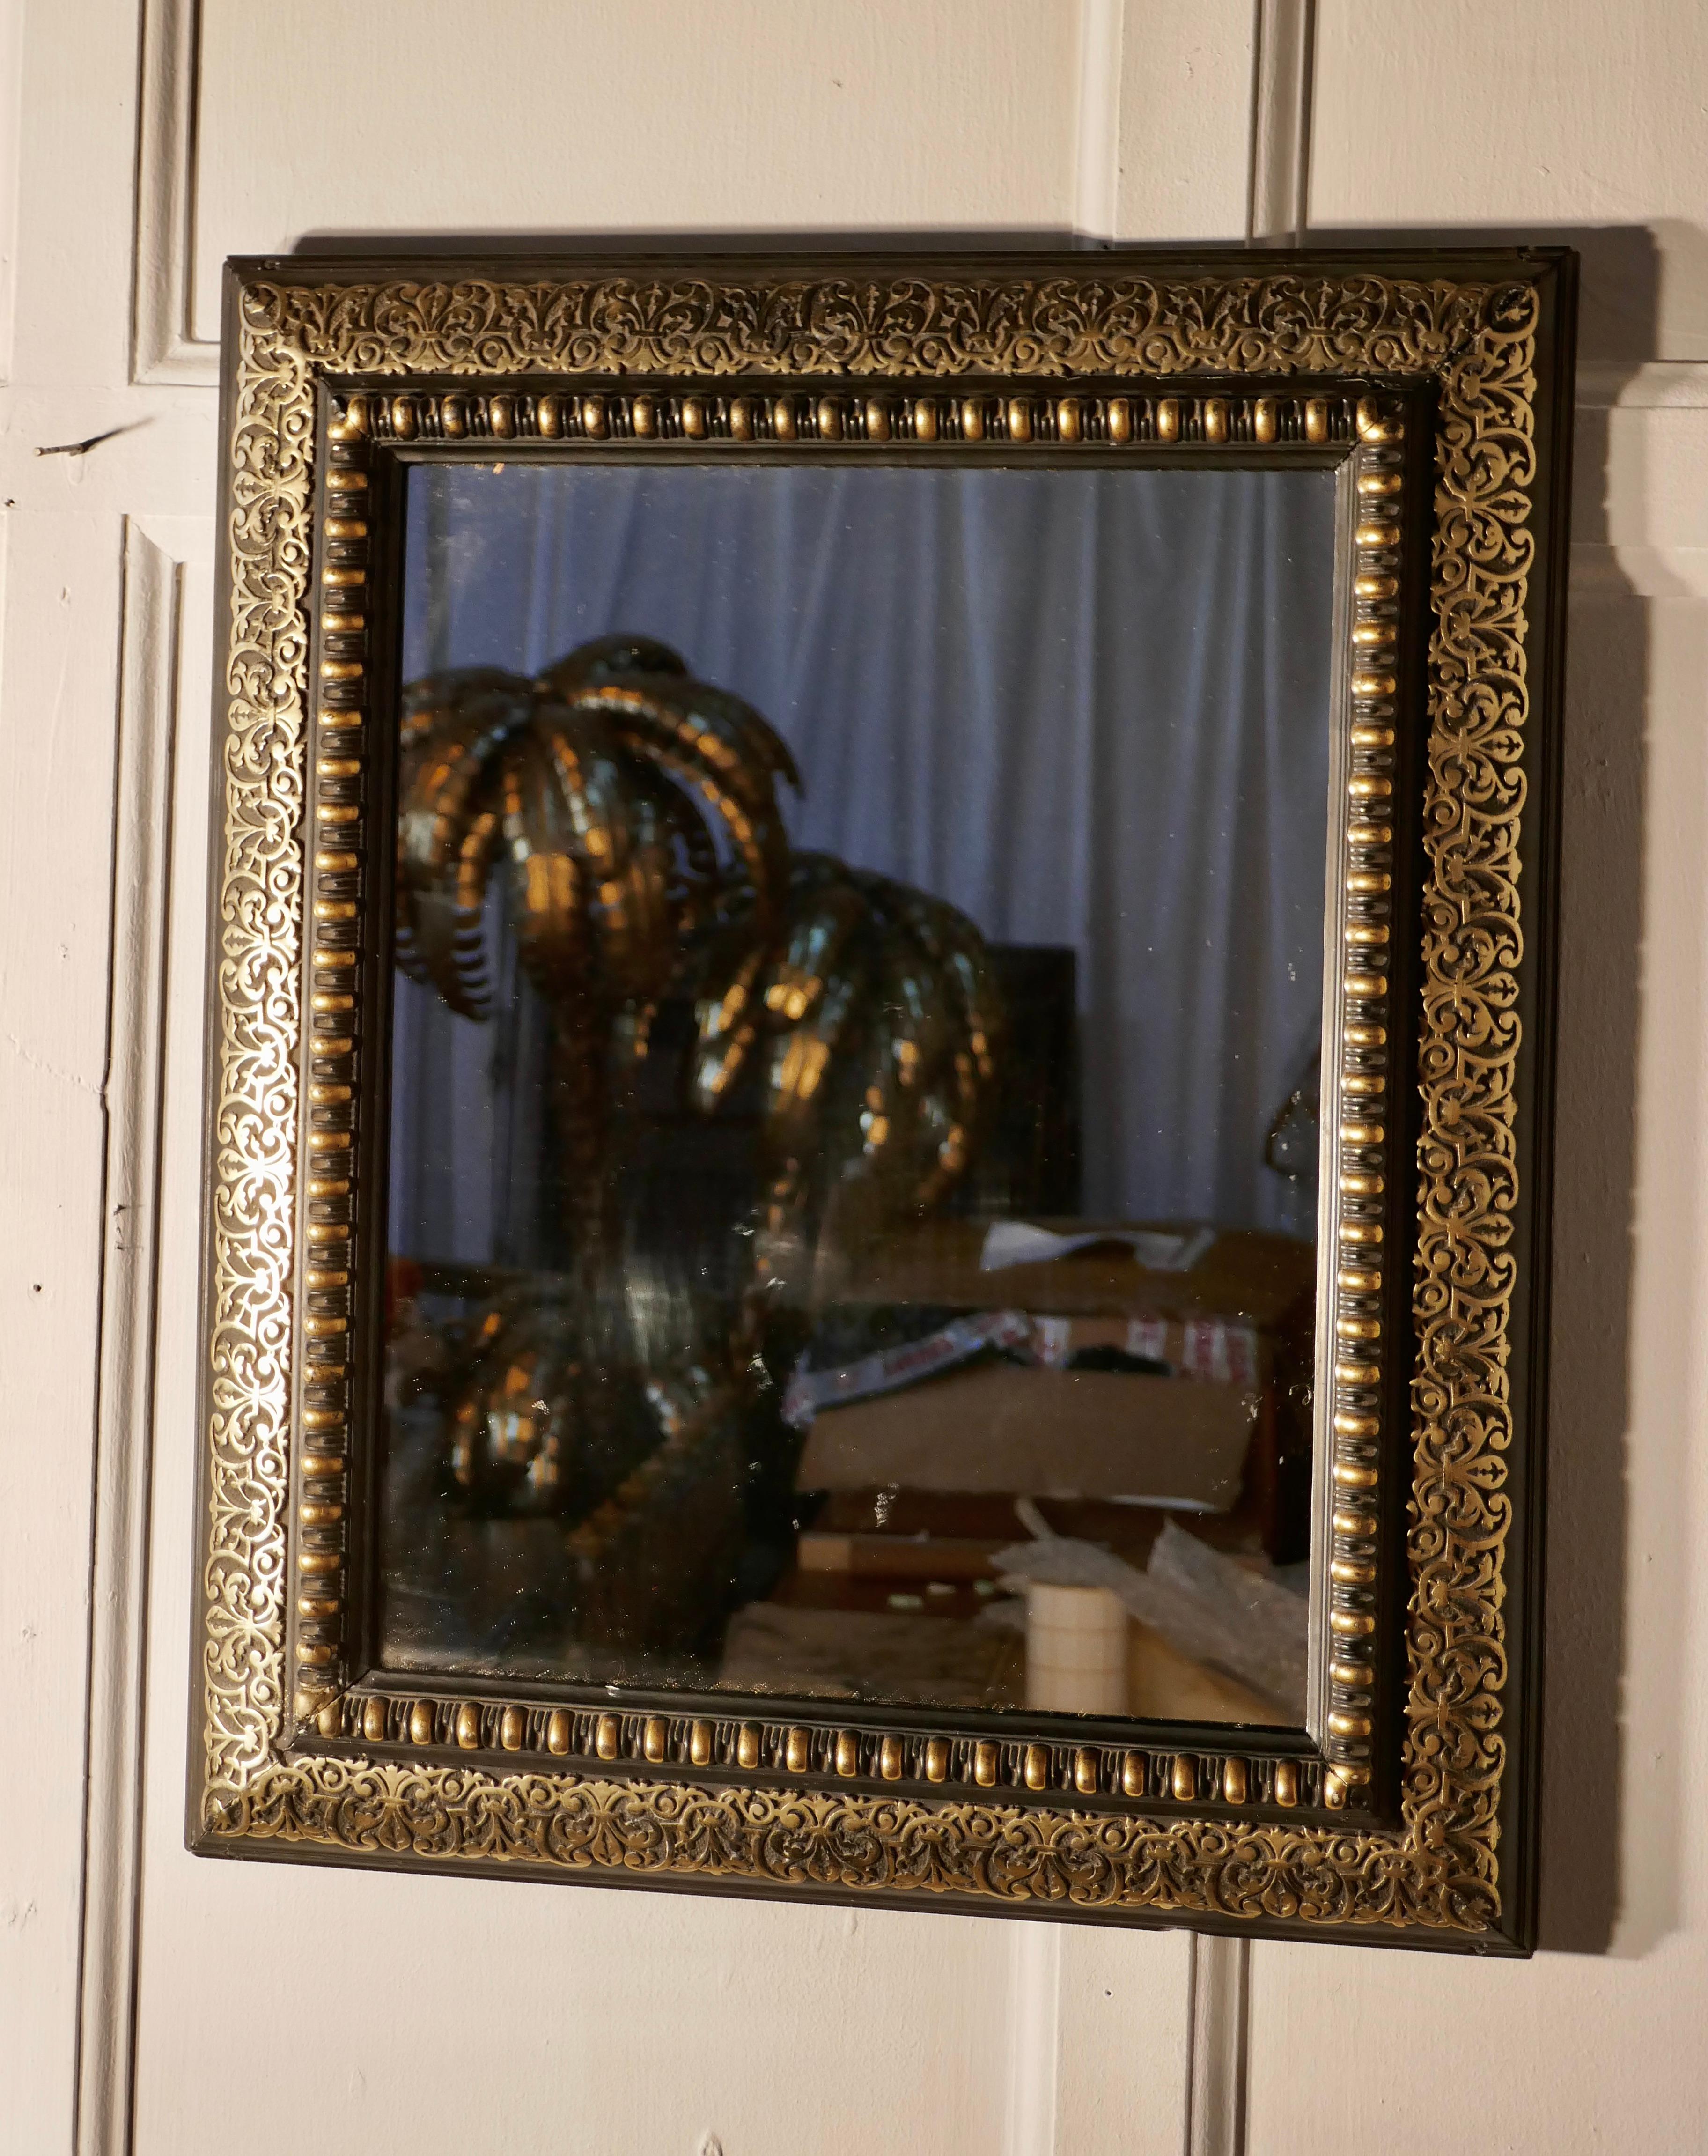 Stunning French Empire gilt brass and black lacquer wall mirror

This is a wonderful piece, the rectangular frame is decorated with a 4” wide pierced brass border, the inner part of the frame is in black and gilded gesso
This is a very lovely